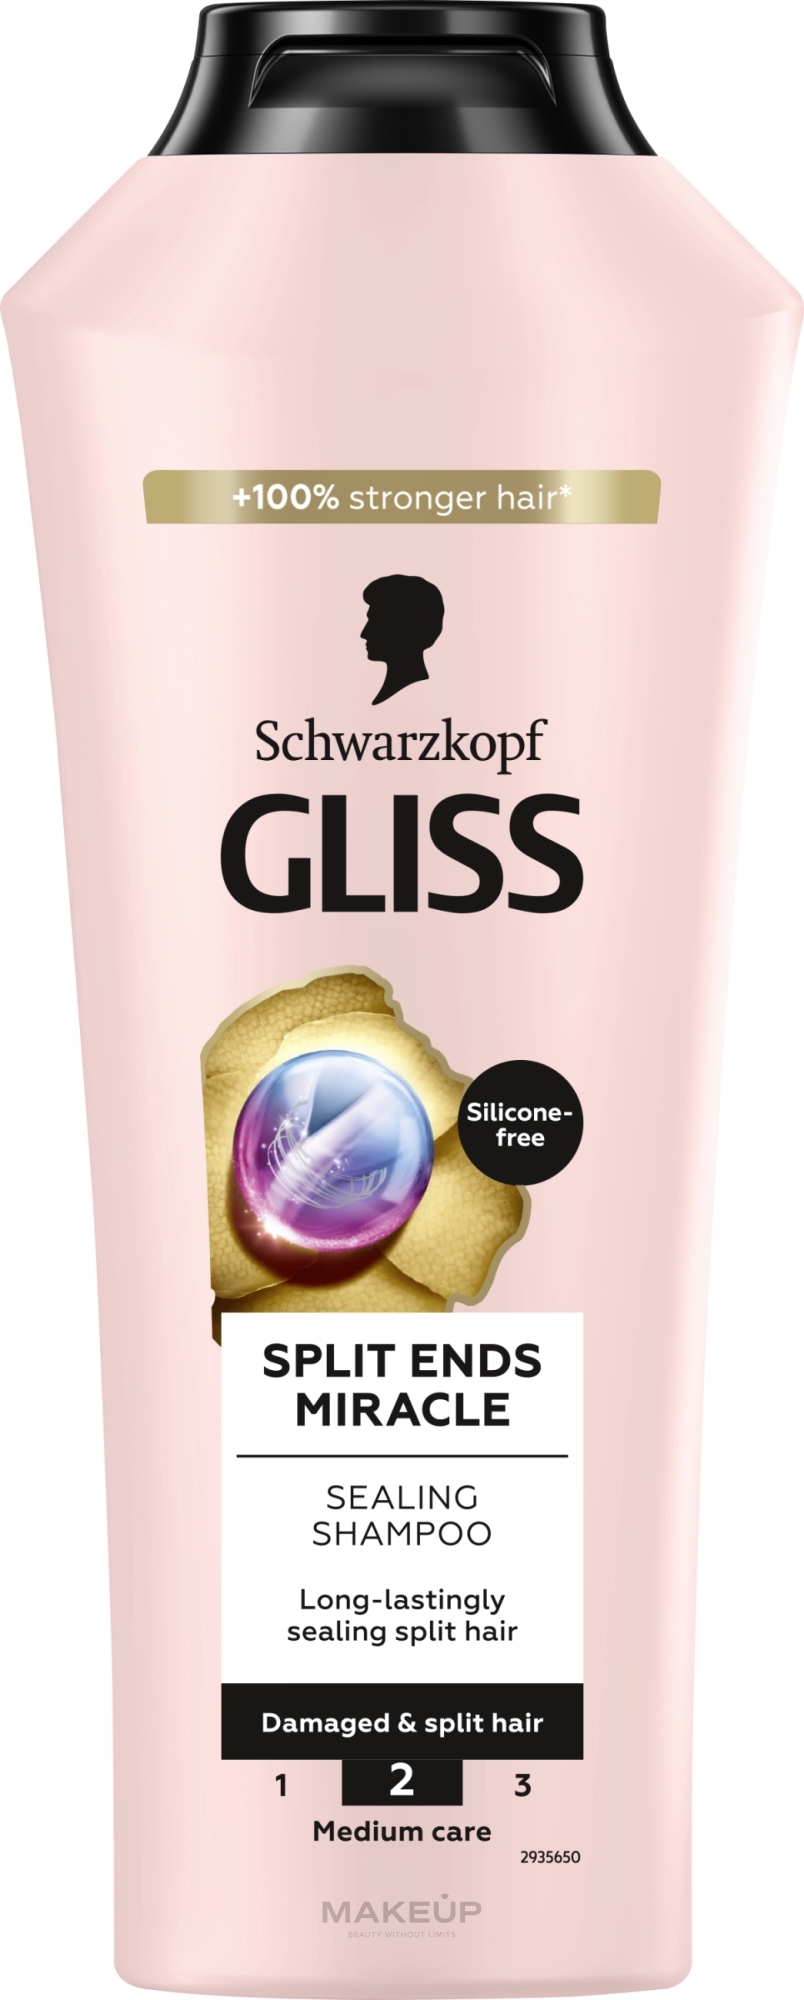 Shampoo for Split Ends - Gliss Split Ends Miracle Sealing Shampoo — photo 400 ml